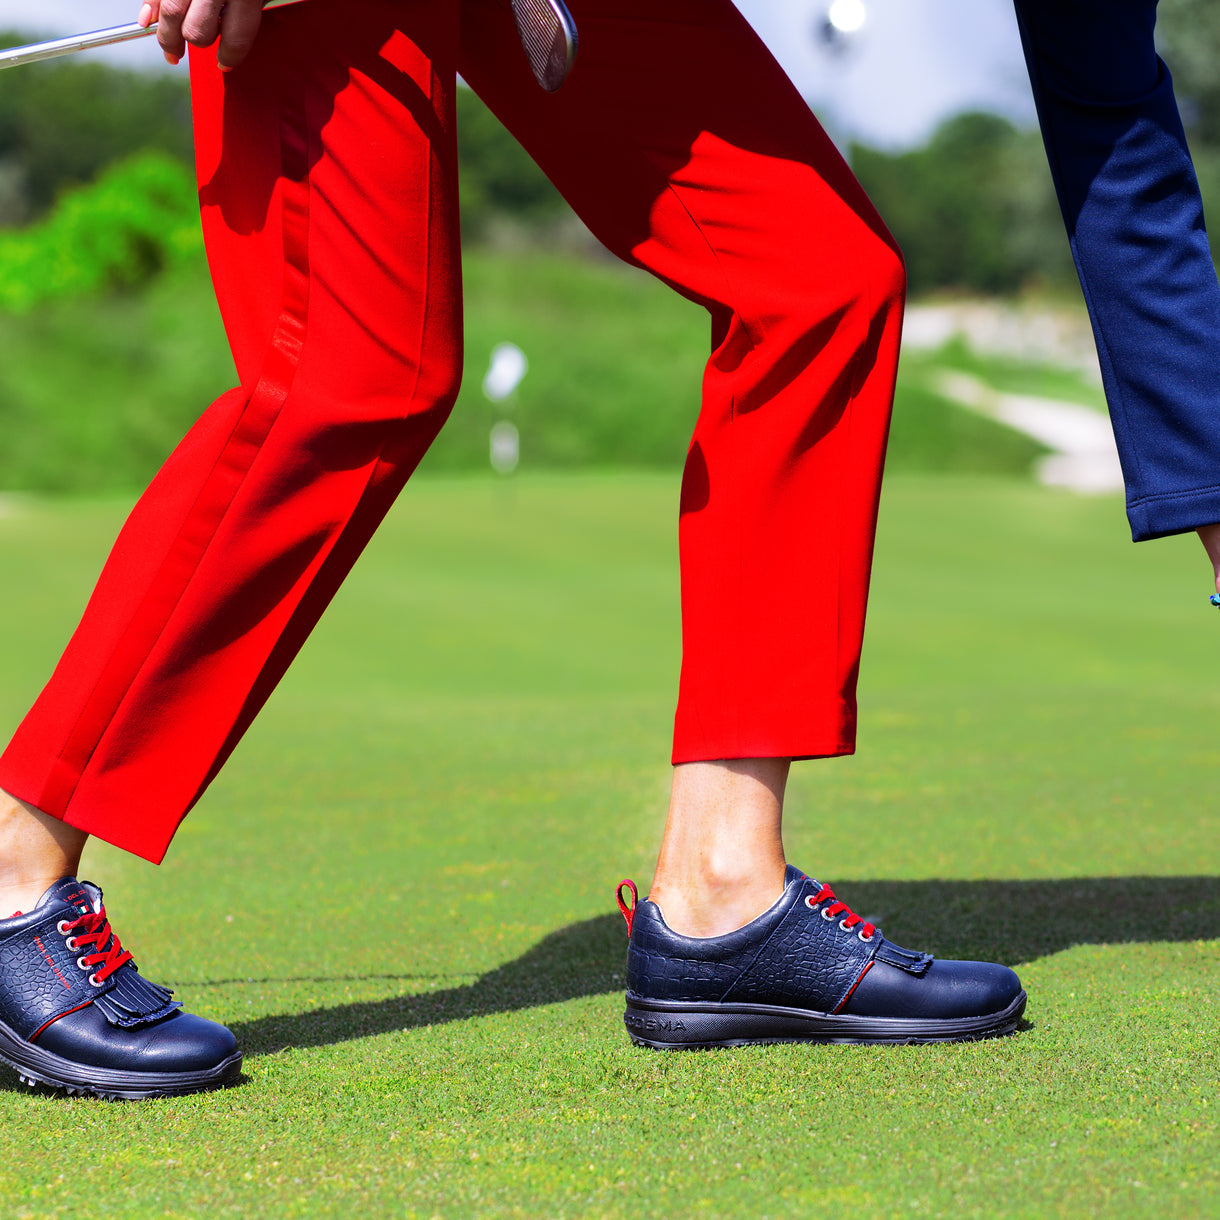 Golf Clothes – The Basics You Need